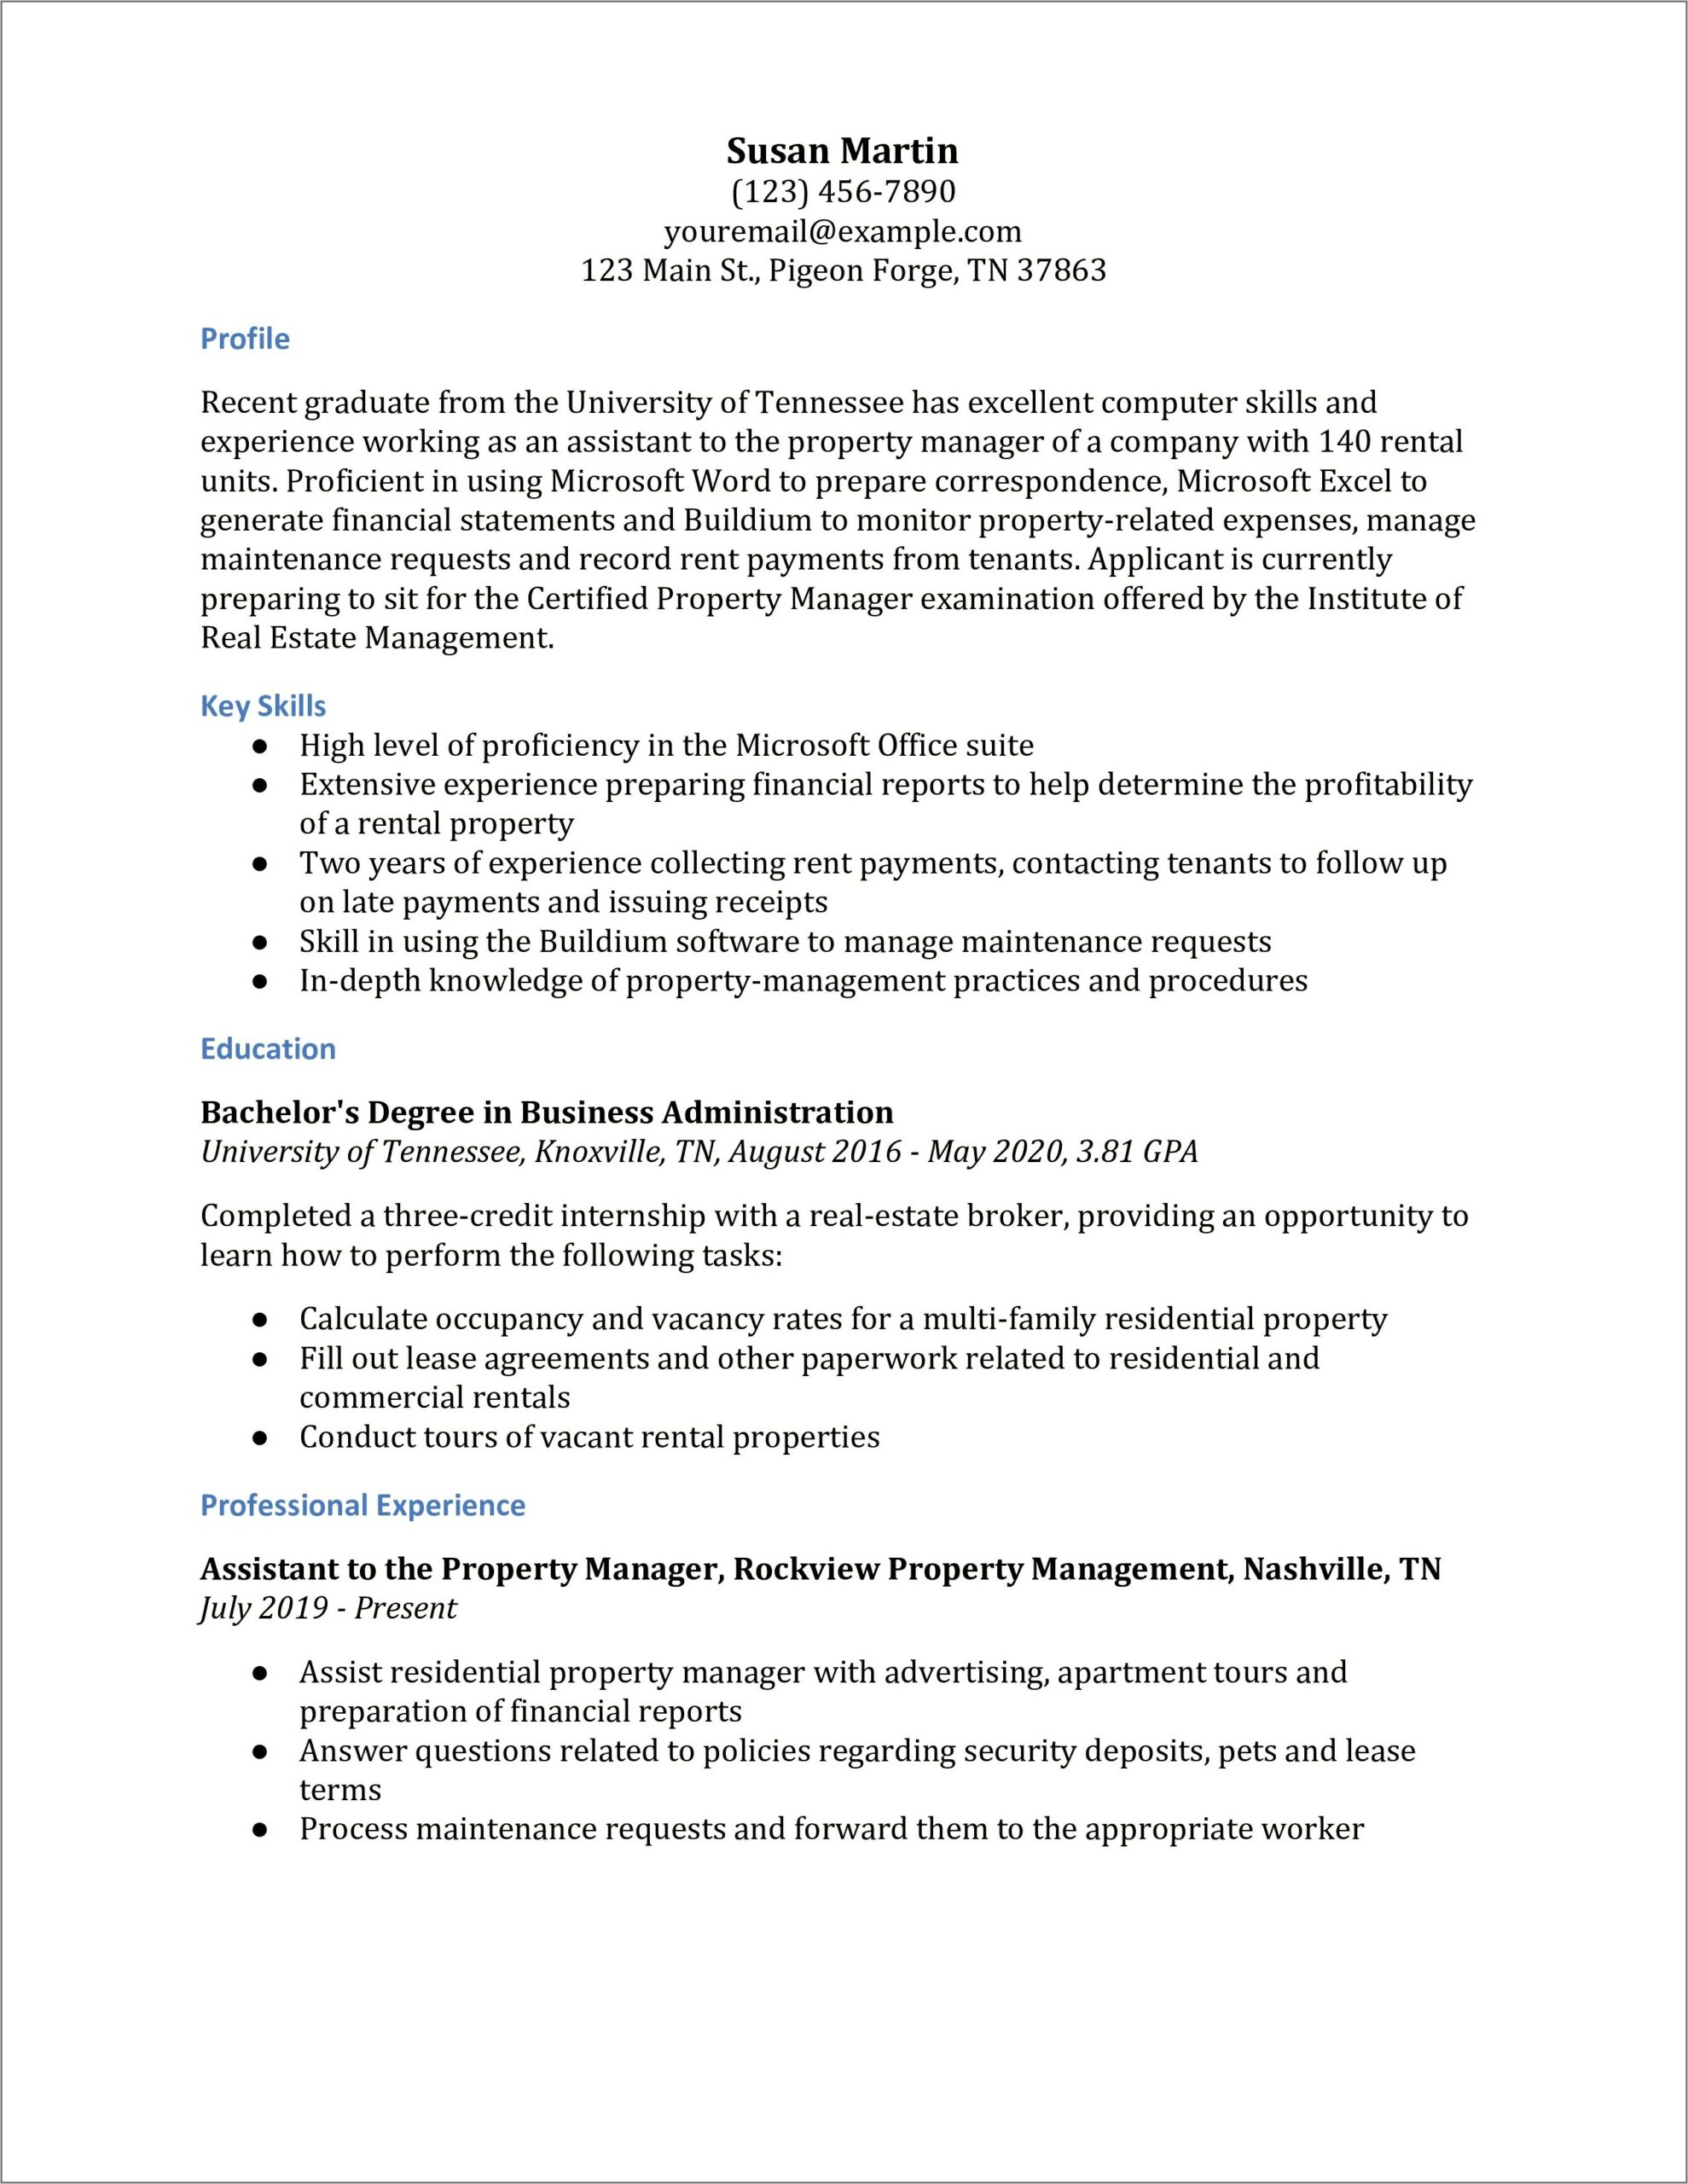 Sample Resume For Assistant Property Manager Core Qualifications